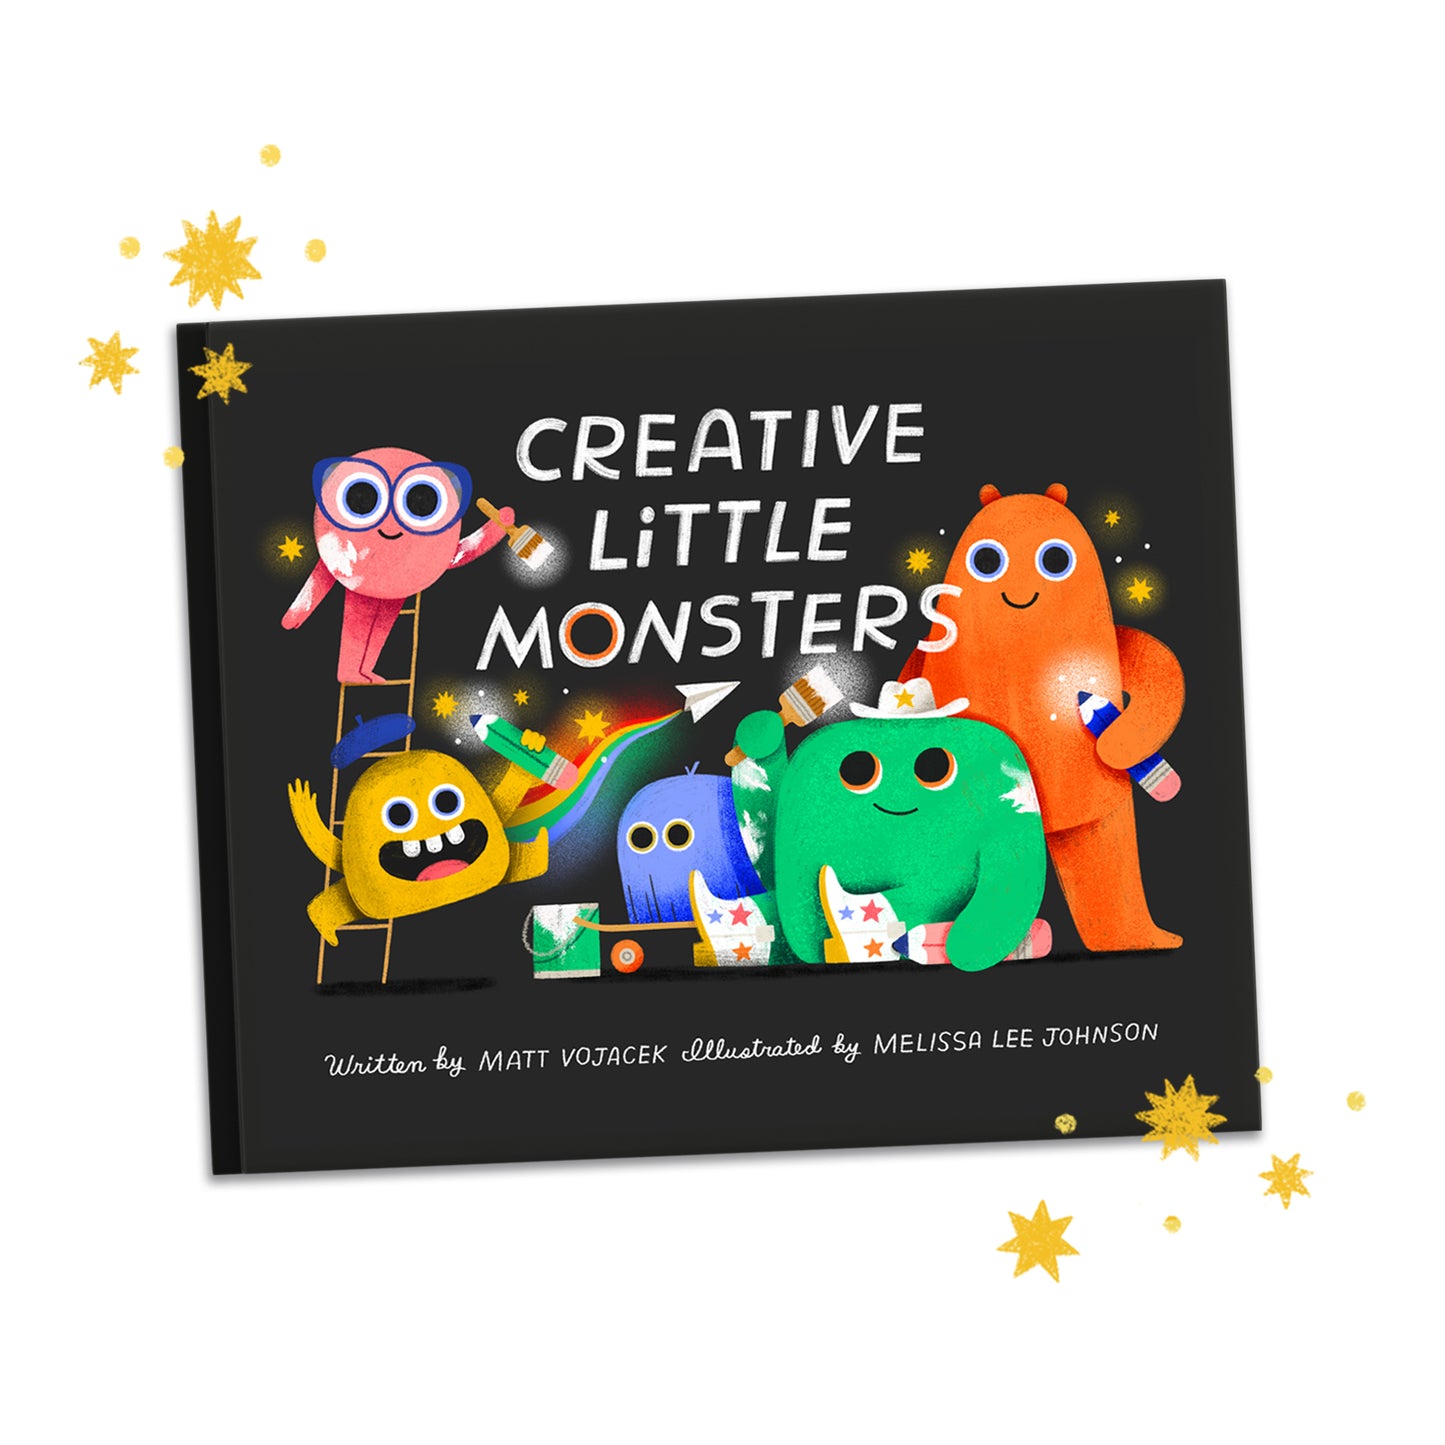 Creative Little Monsters (Hardcover)